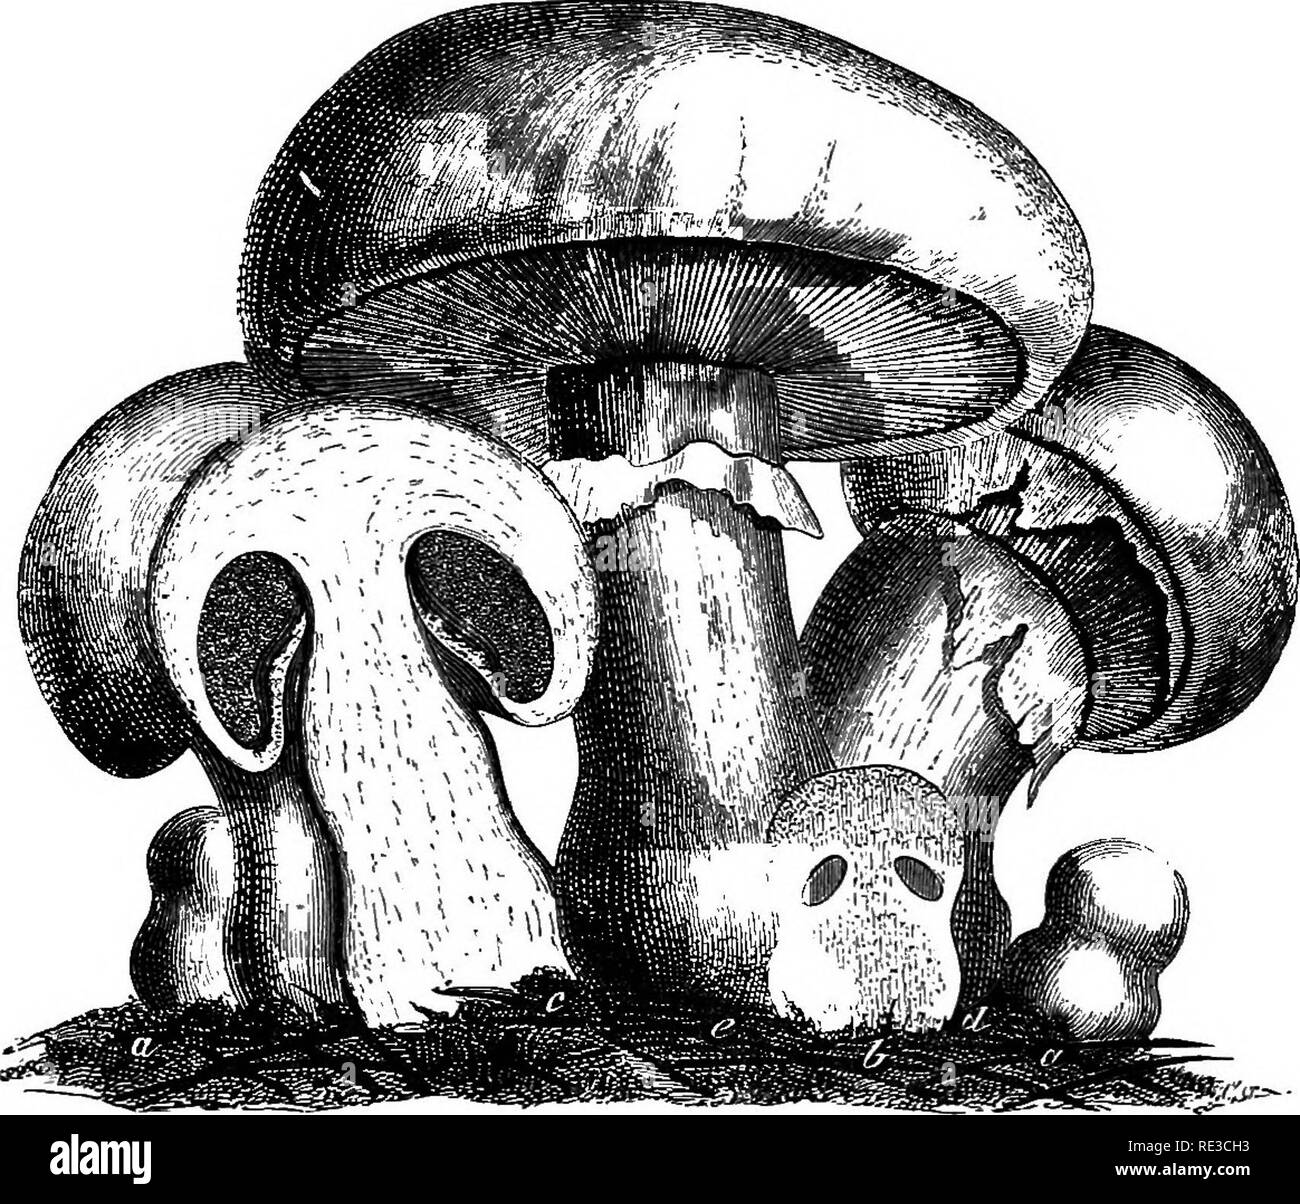 . A handbook of cryptogamic botany. Cryptogams. 392 FUNGI certain instances of more compact character. Such are the srleroies which are resting states of Coprinus stercorarius (Fr.) (fig. 318), and the rhizo- Morphs of Agaricus melleus (L.) (fig. 319), composed of root-Hke branched strands of mycelial hyphae, parasitic on the pine. The rhizo- morphs are simply sclerotes with growing-points. From the mycele, of whatever character it be, there arises the compound sporophore by the continued apical or marginal growth of a bundle of hyphse. It is not certain, but it may very well be, that intercal Stock Photo